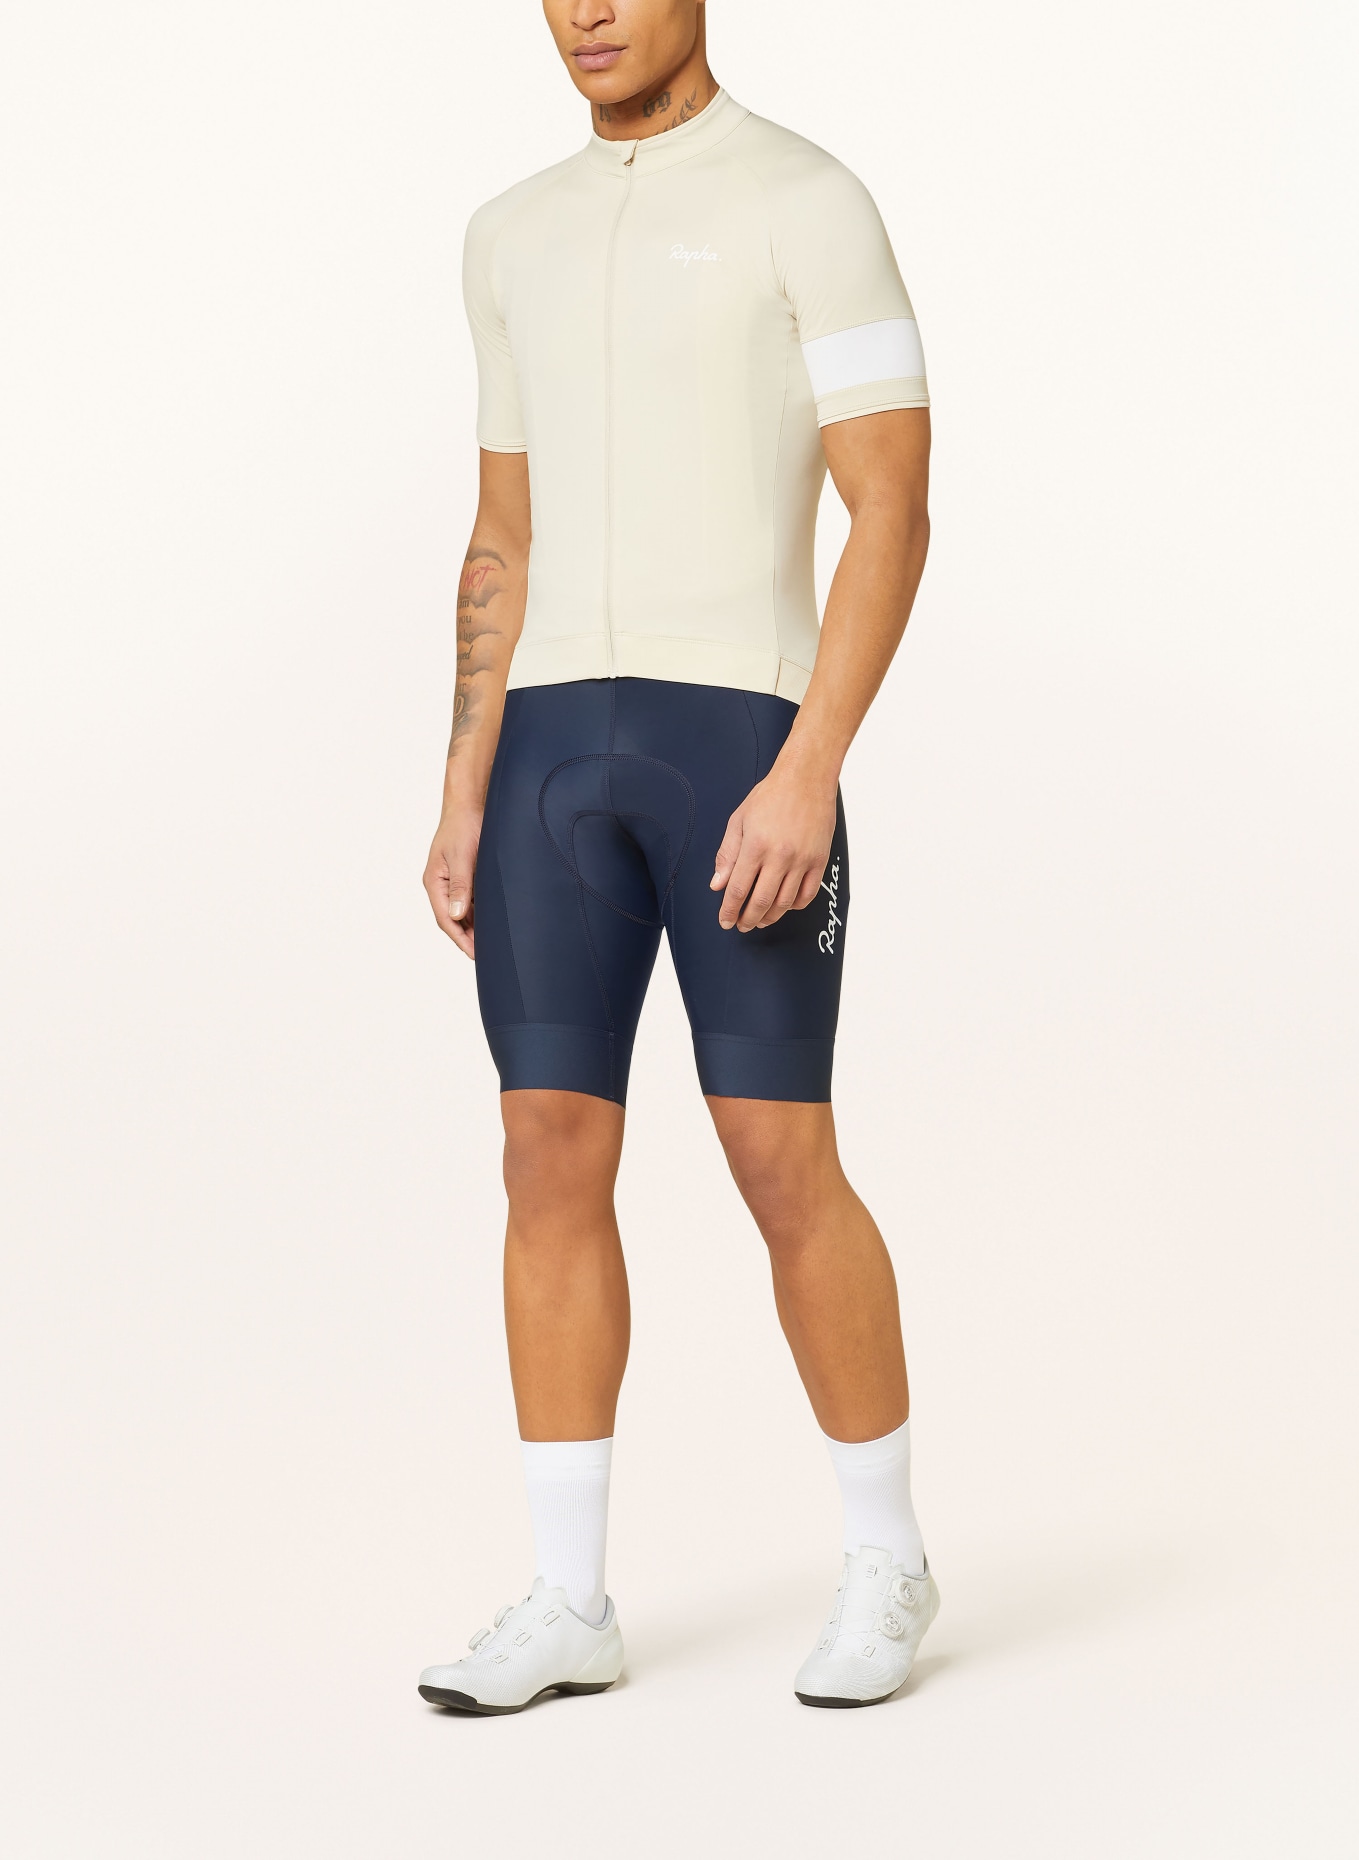 Rapha Cycling jersey CORE, Color: BEIGE (Image 2)